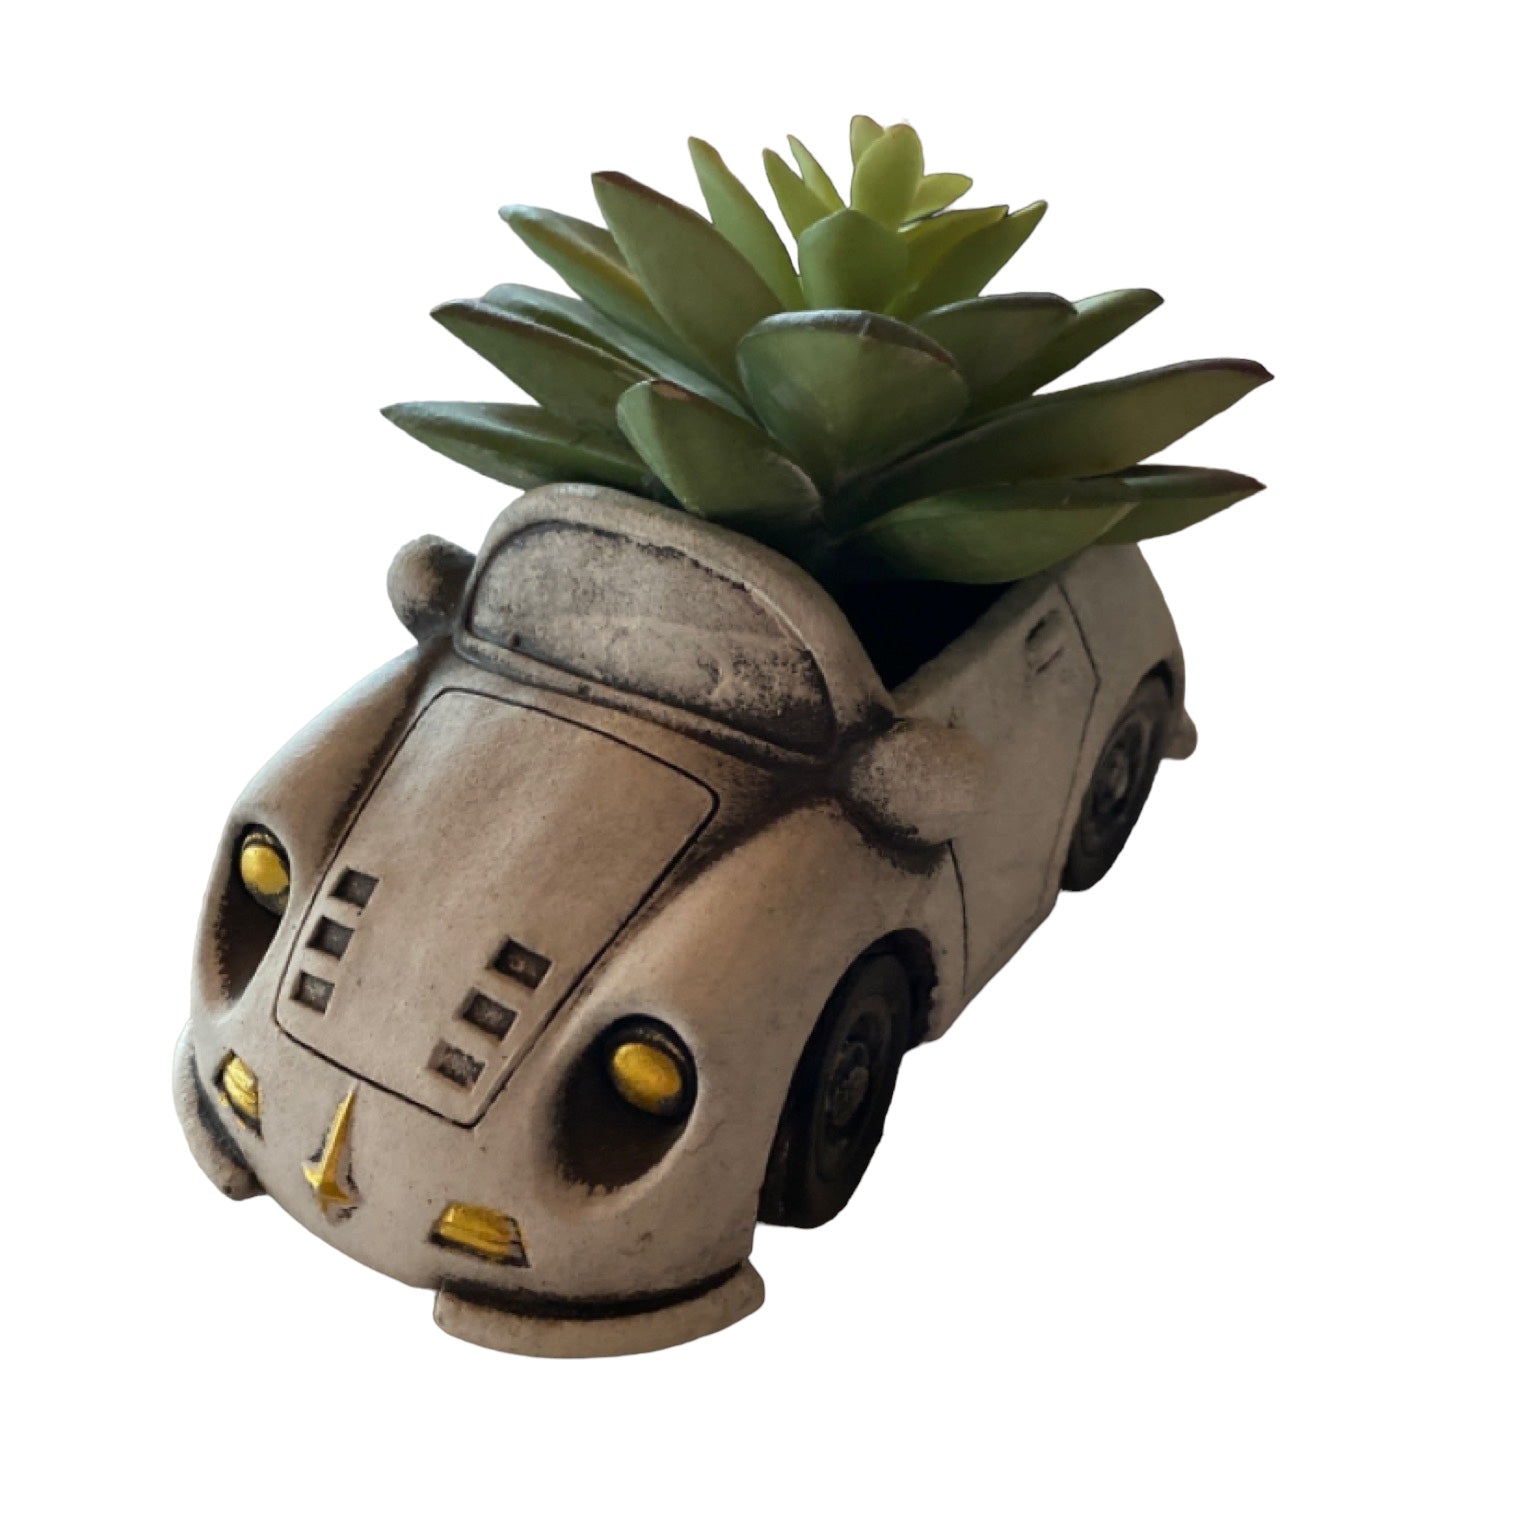 Car Convertible Planter Pot - The Renmy Store Homewares & Gifts 